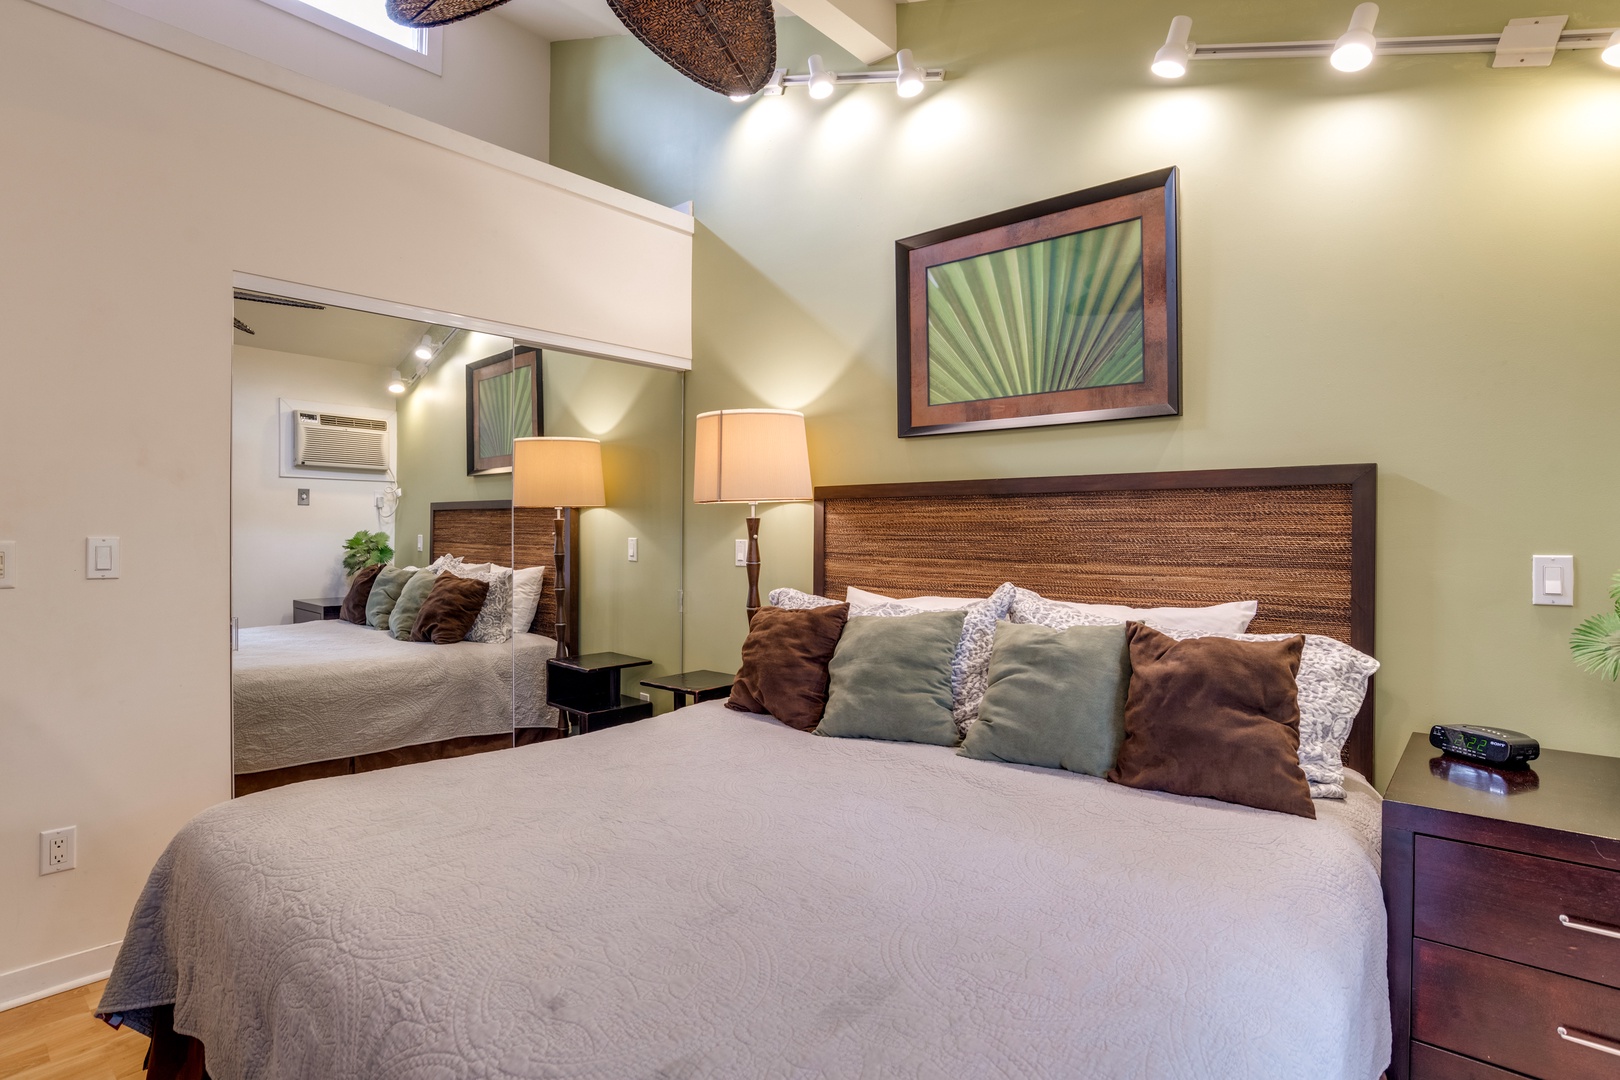 Lahaina Vacation Rentals, Aina Nalu I201 - Guest bedroom with king bed